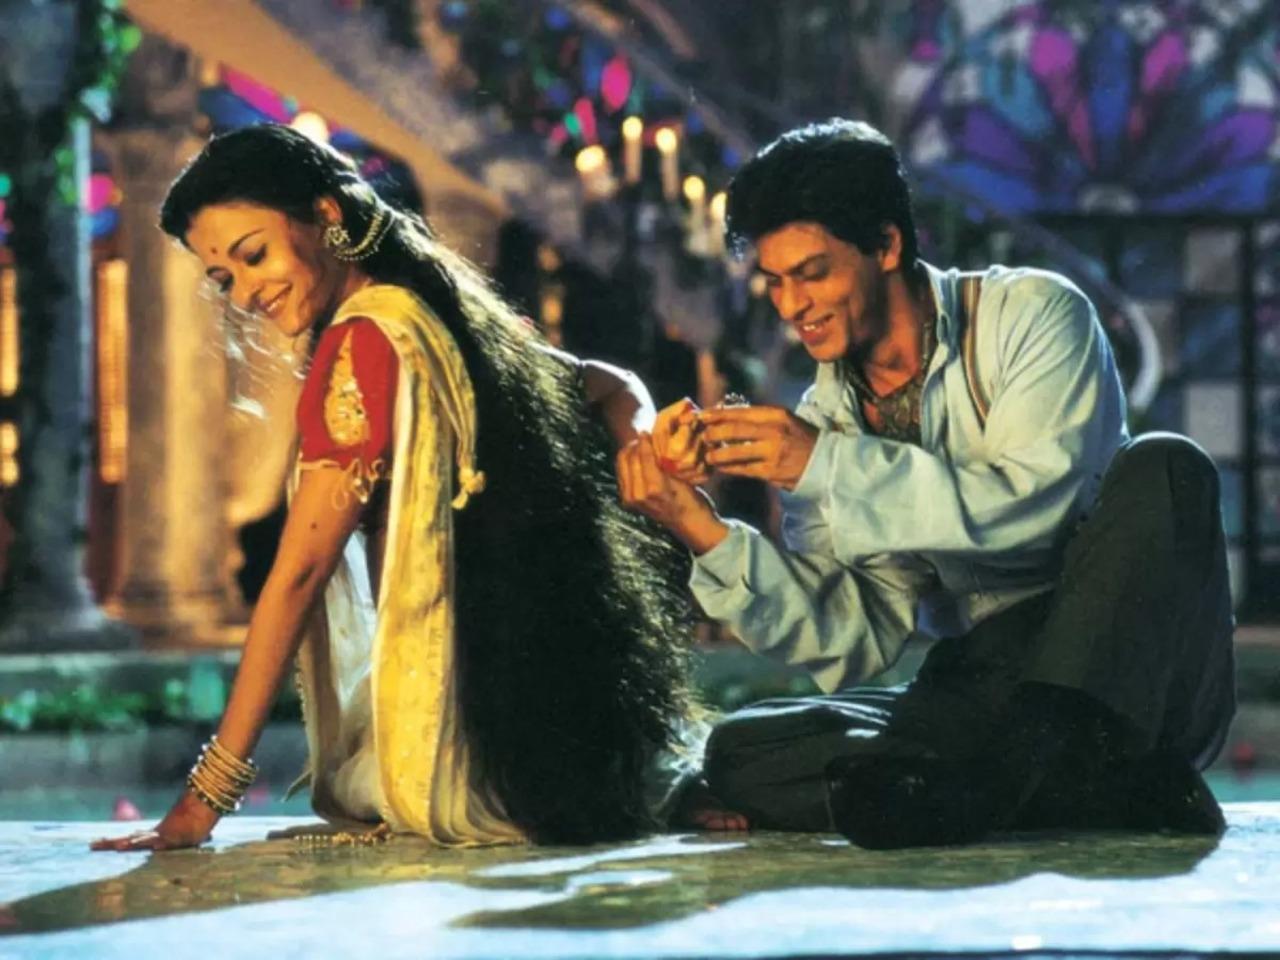 Devdas (2002) 
For his second collaboration with SLB, he created the world of Devdas